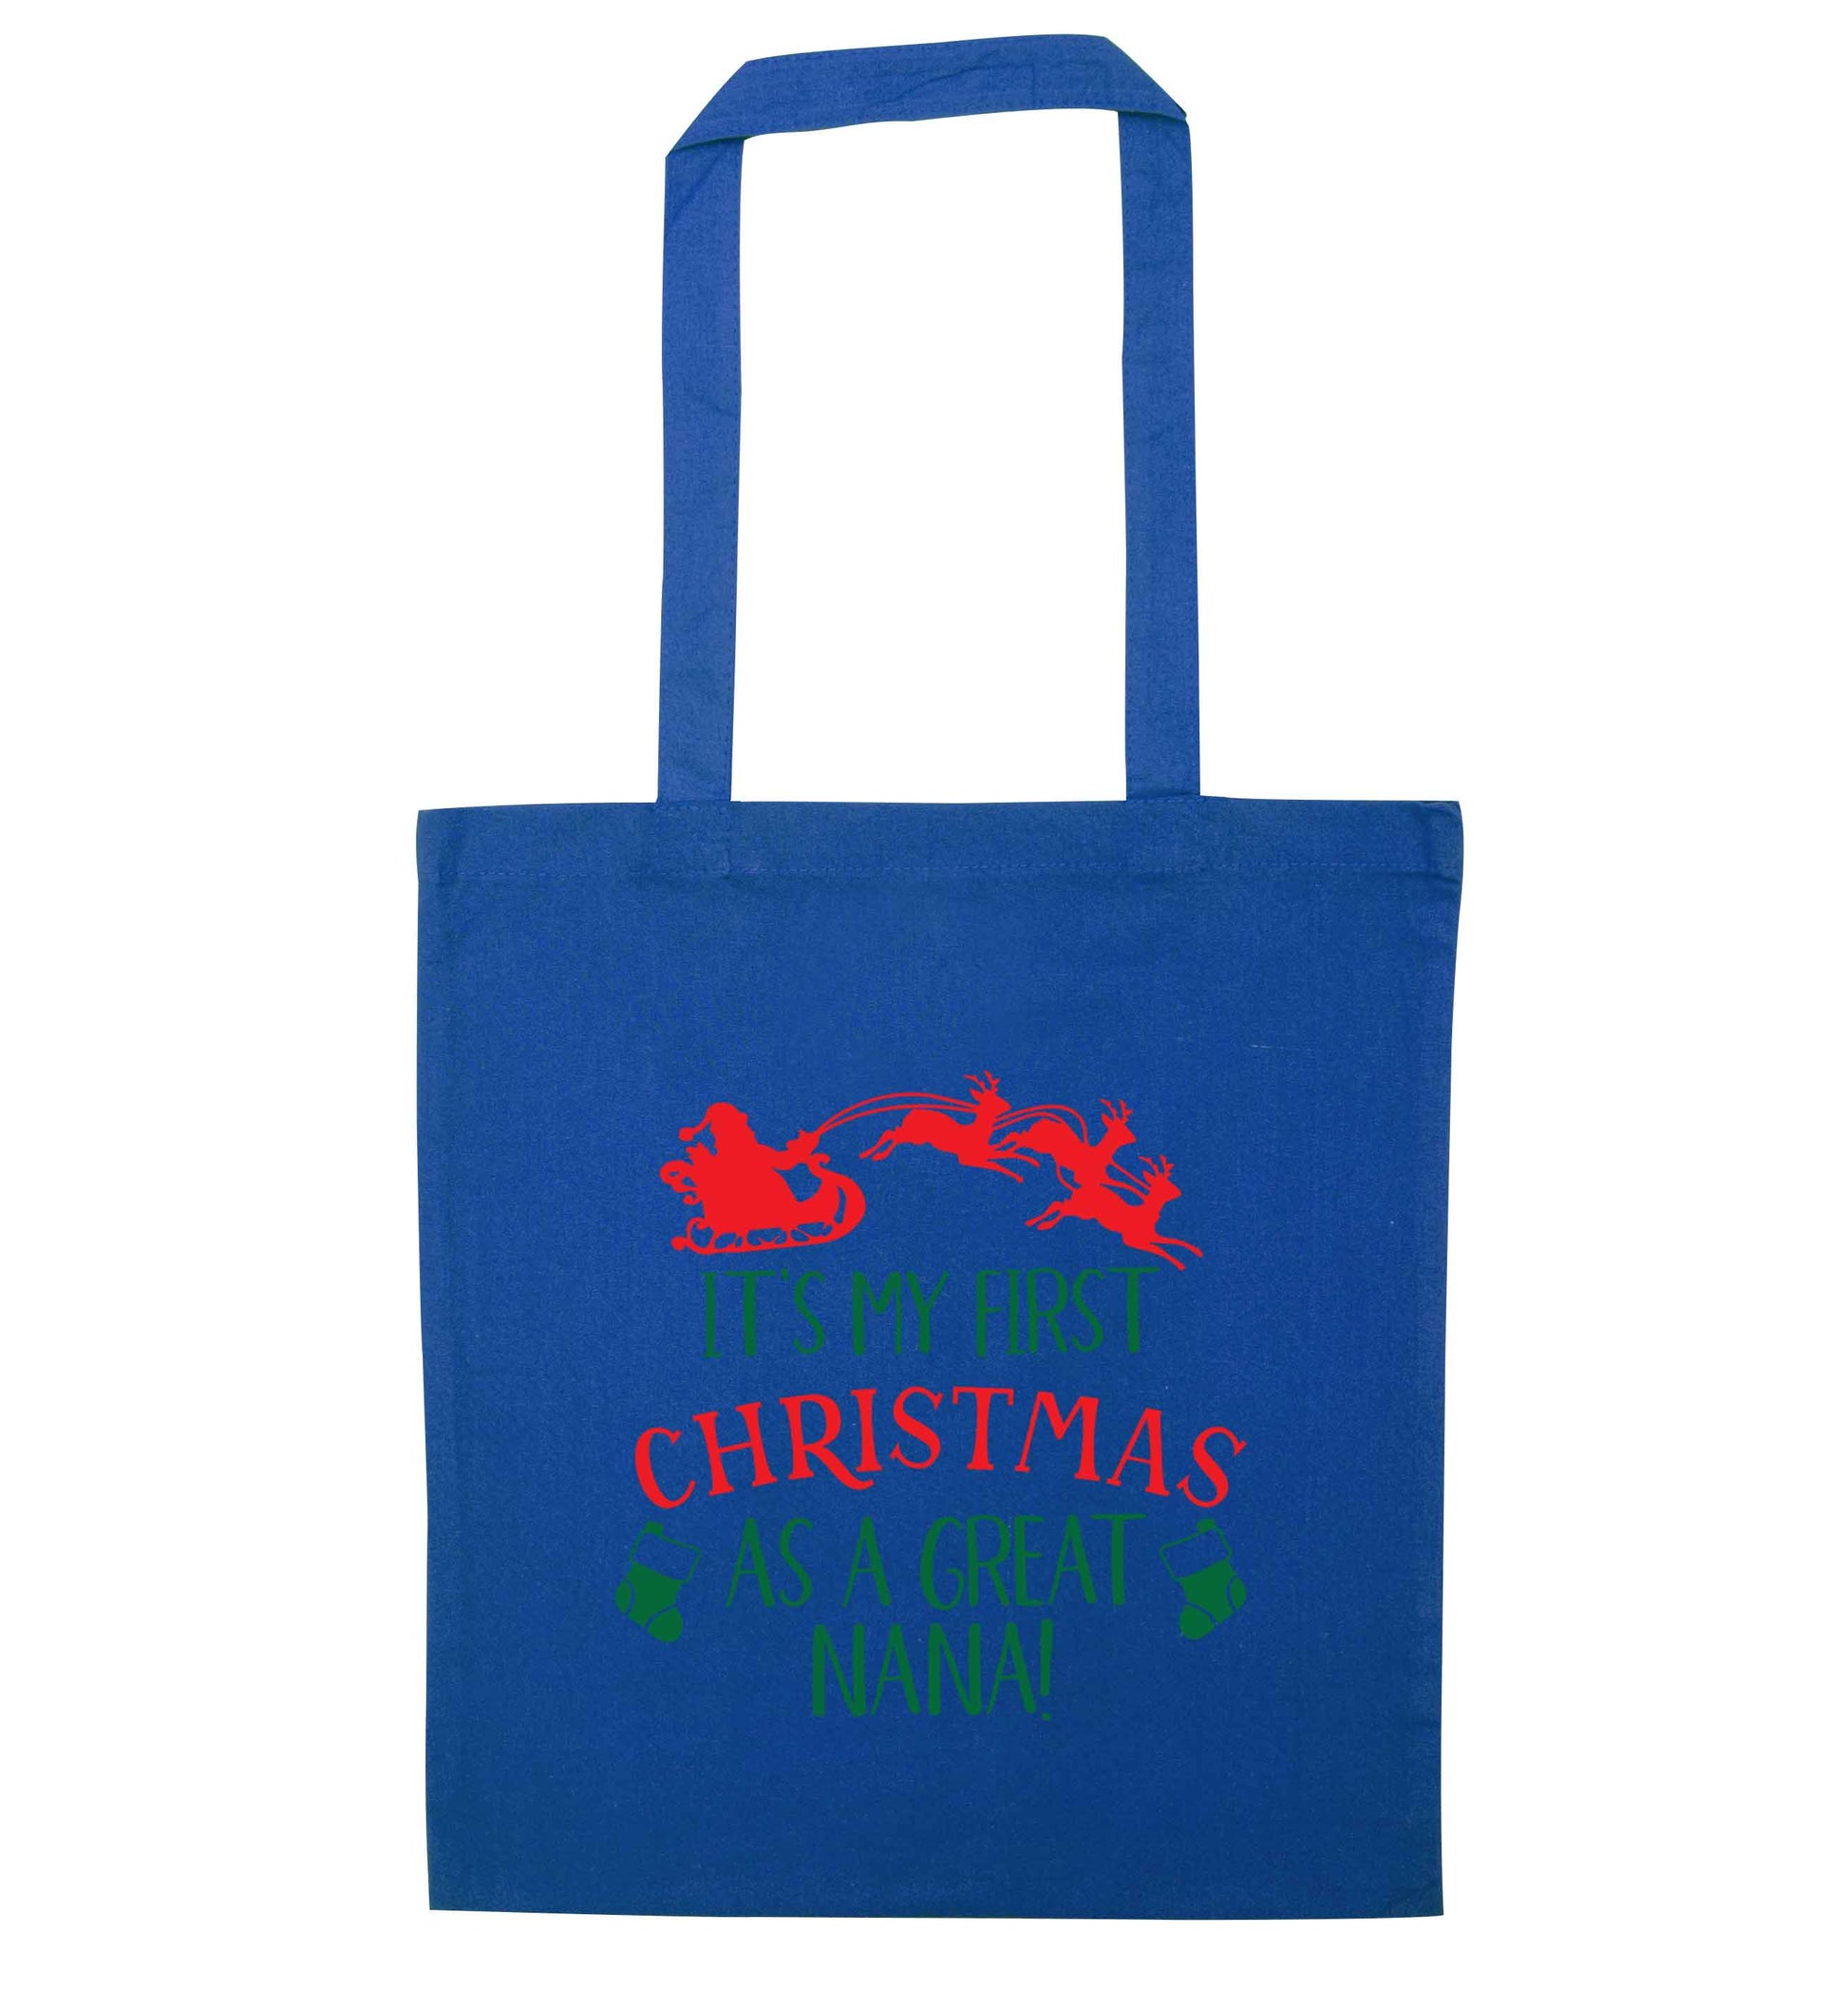 It's my first Christmas as a great nana! blue tote bag